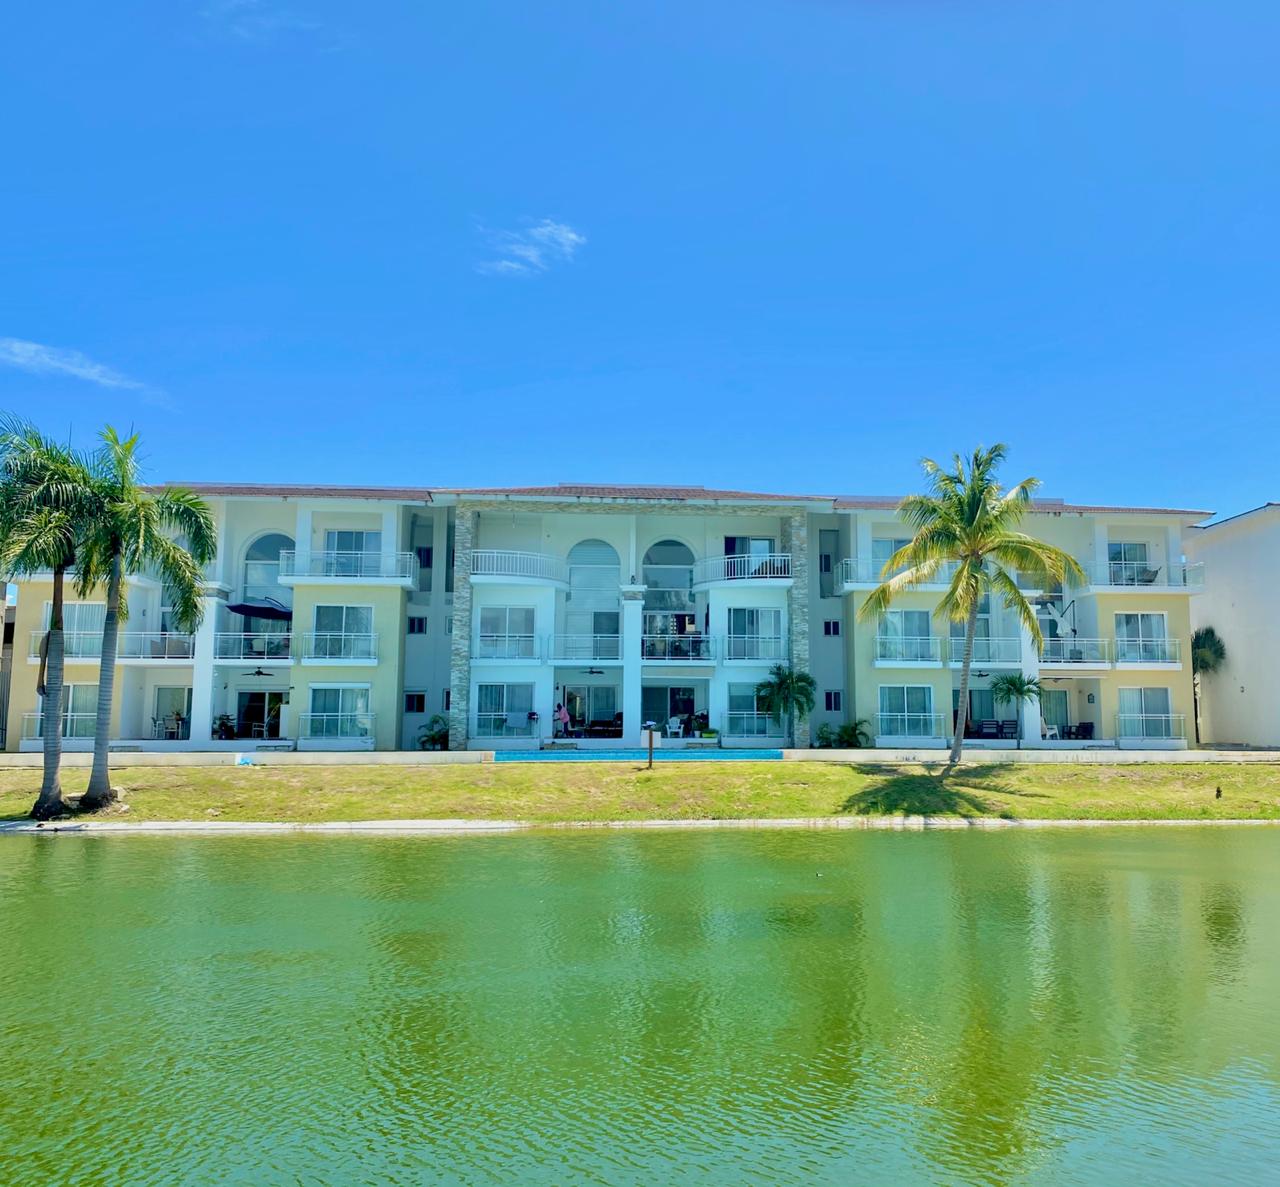 Rented! Golf Apartments 2-3 BR With Lake and Pool View, Cocotal. Bavaro, Dominican Republic